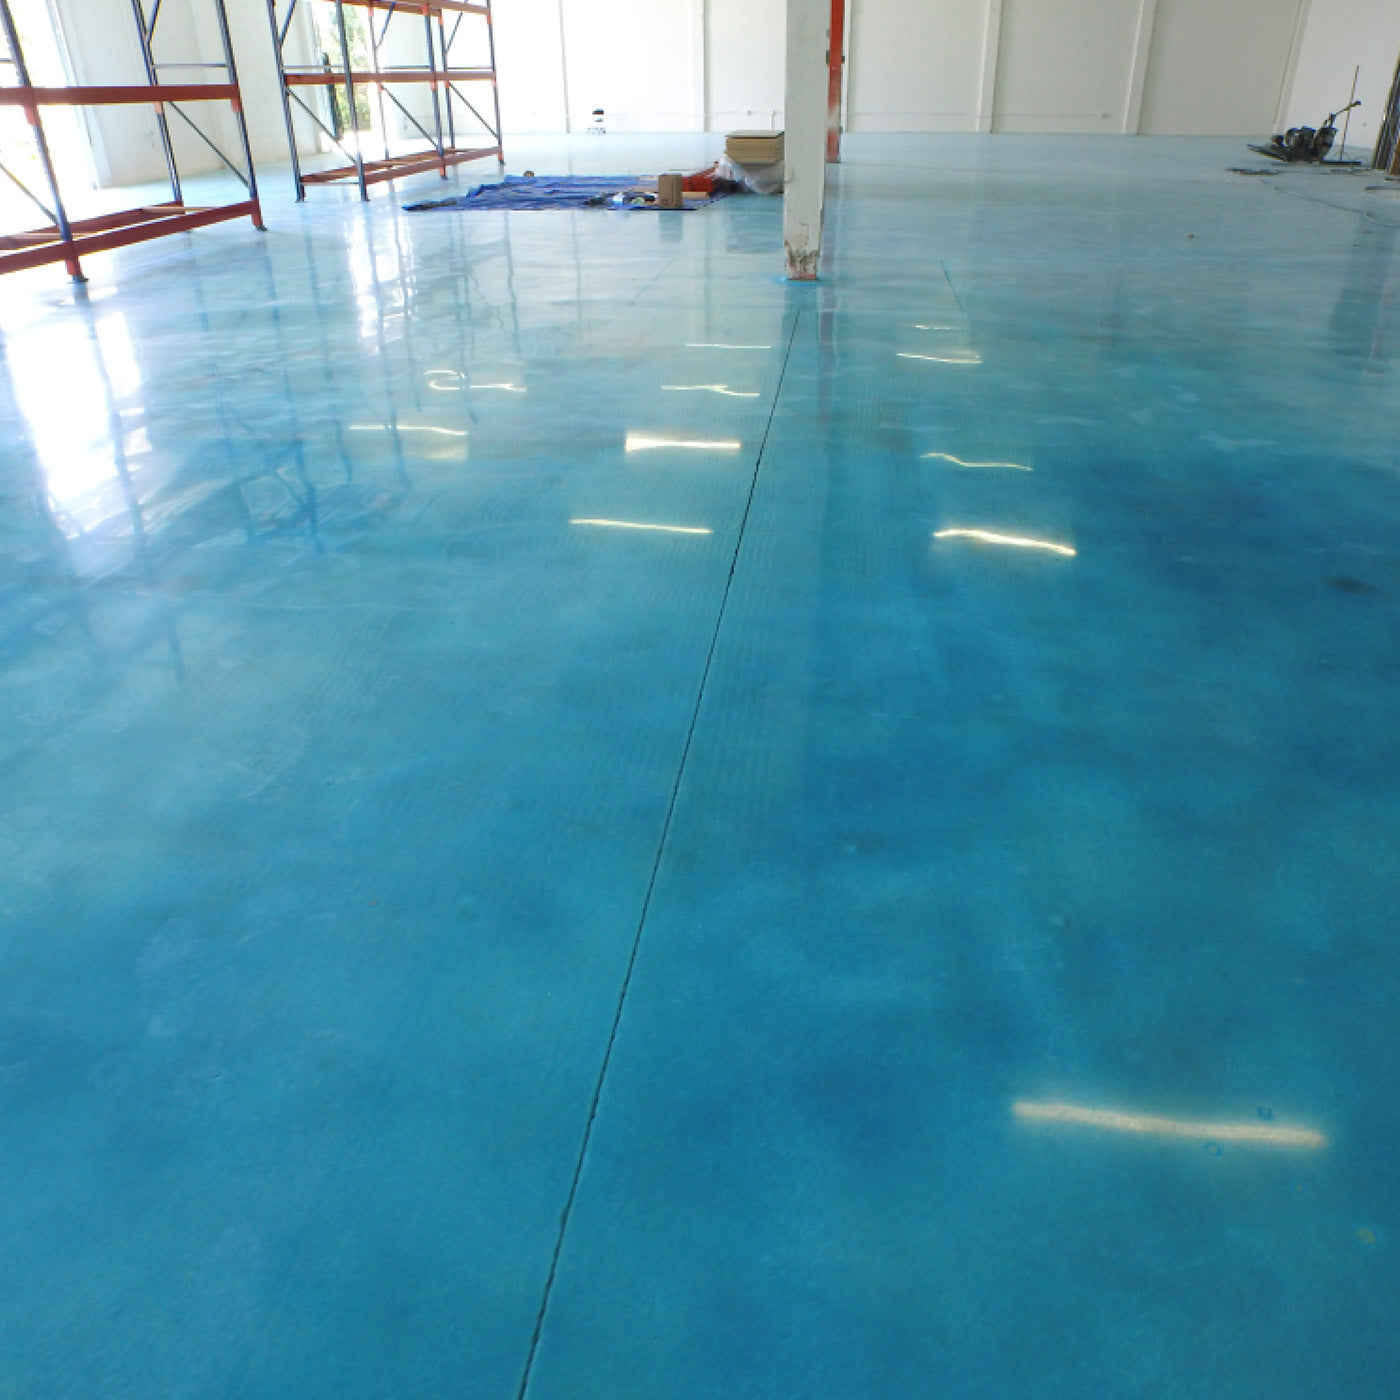 Blue epoxy floor in large interior space | XPS - xtreme polishing systems, chantilly flooring, polishing store, flooring supplies, and concrete floor shop.